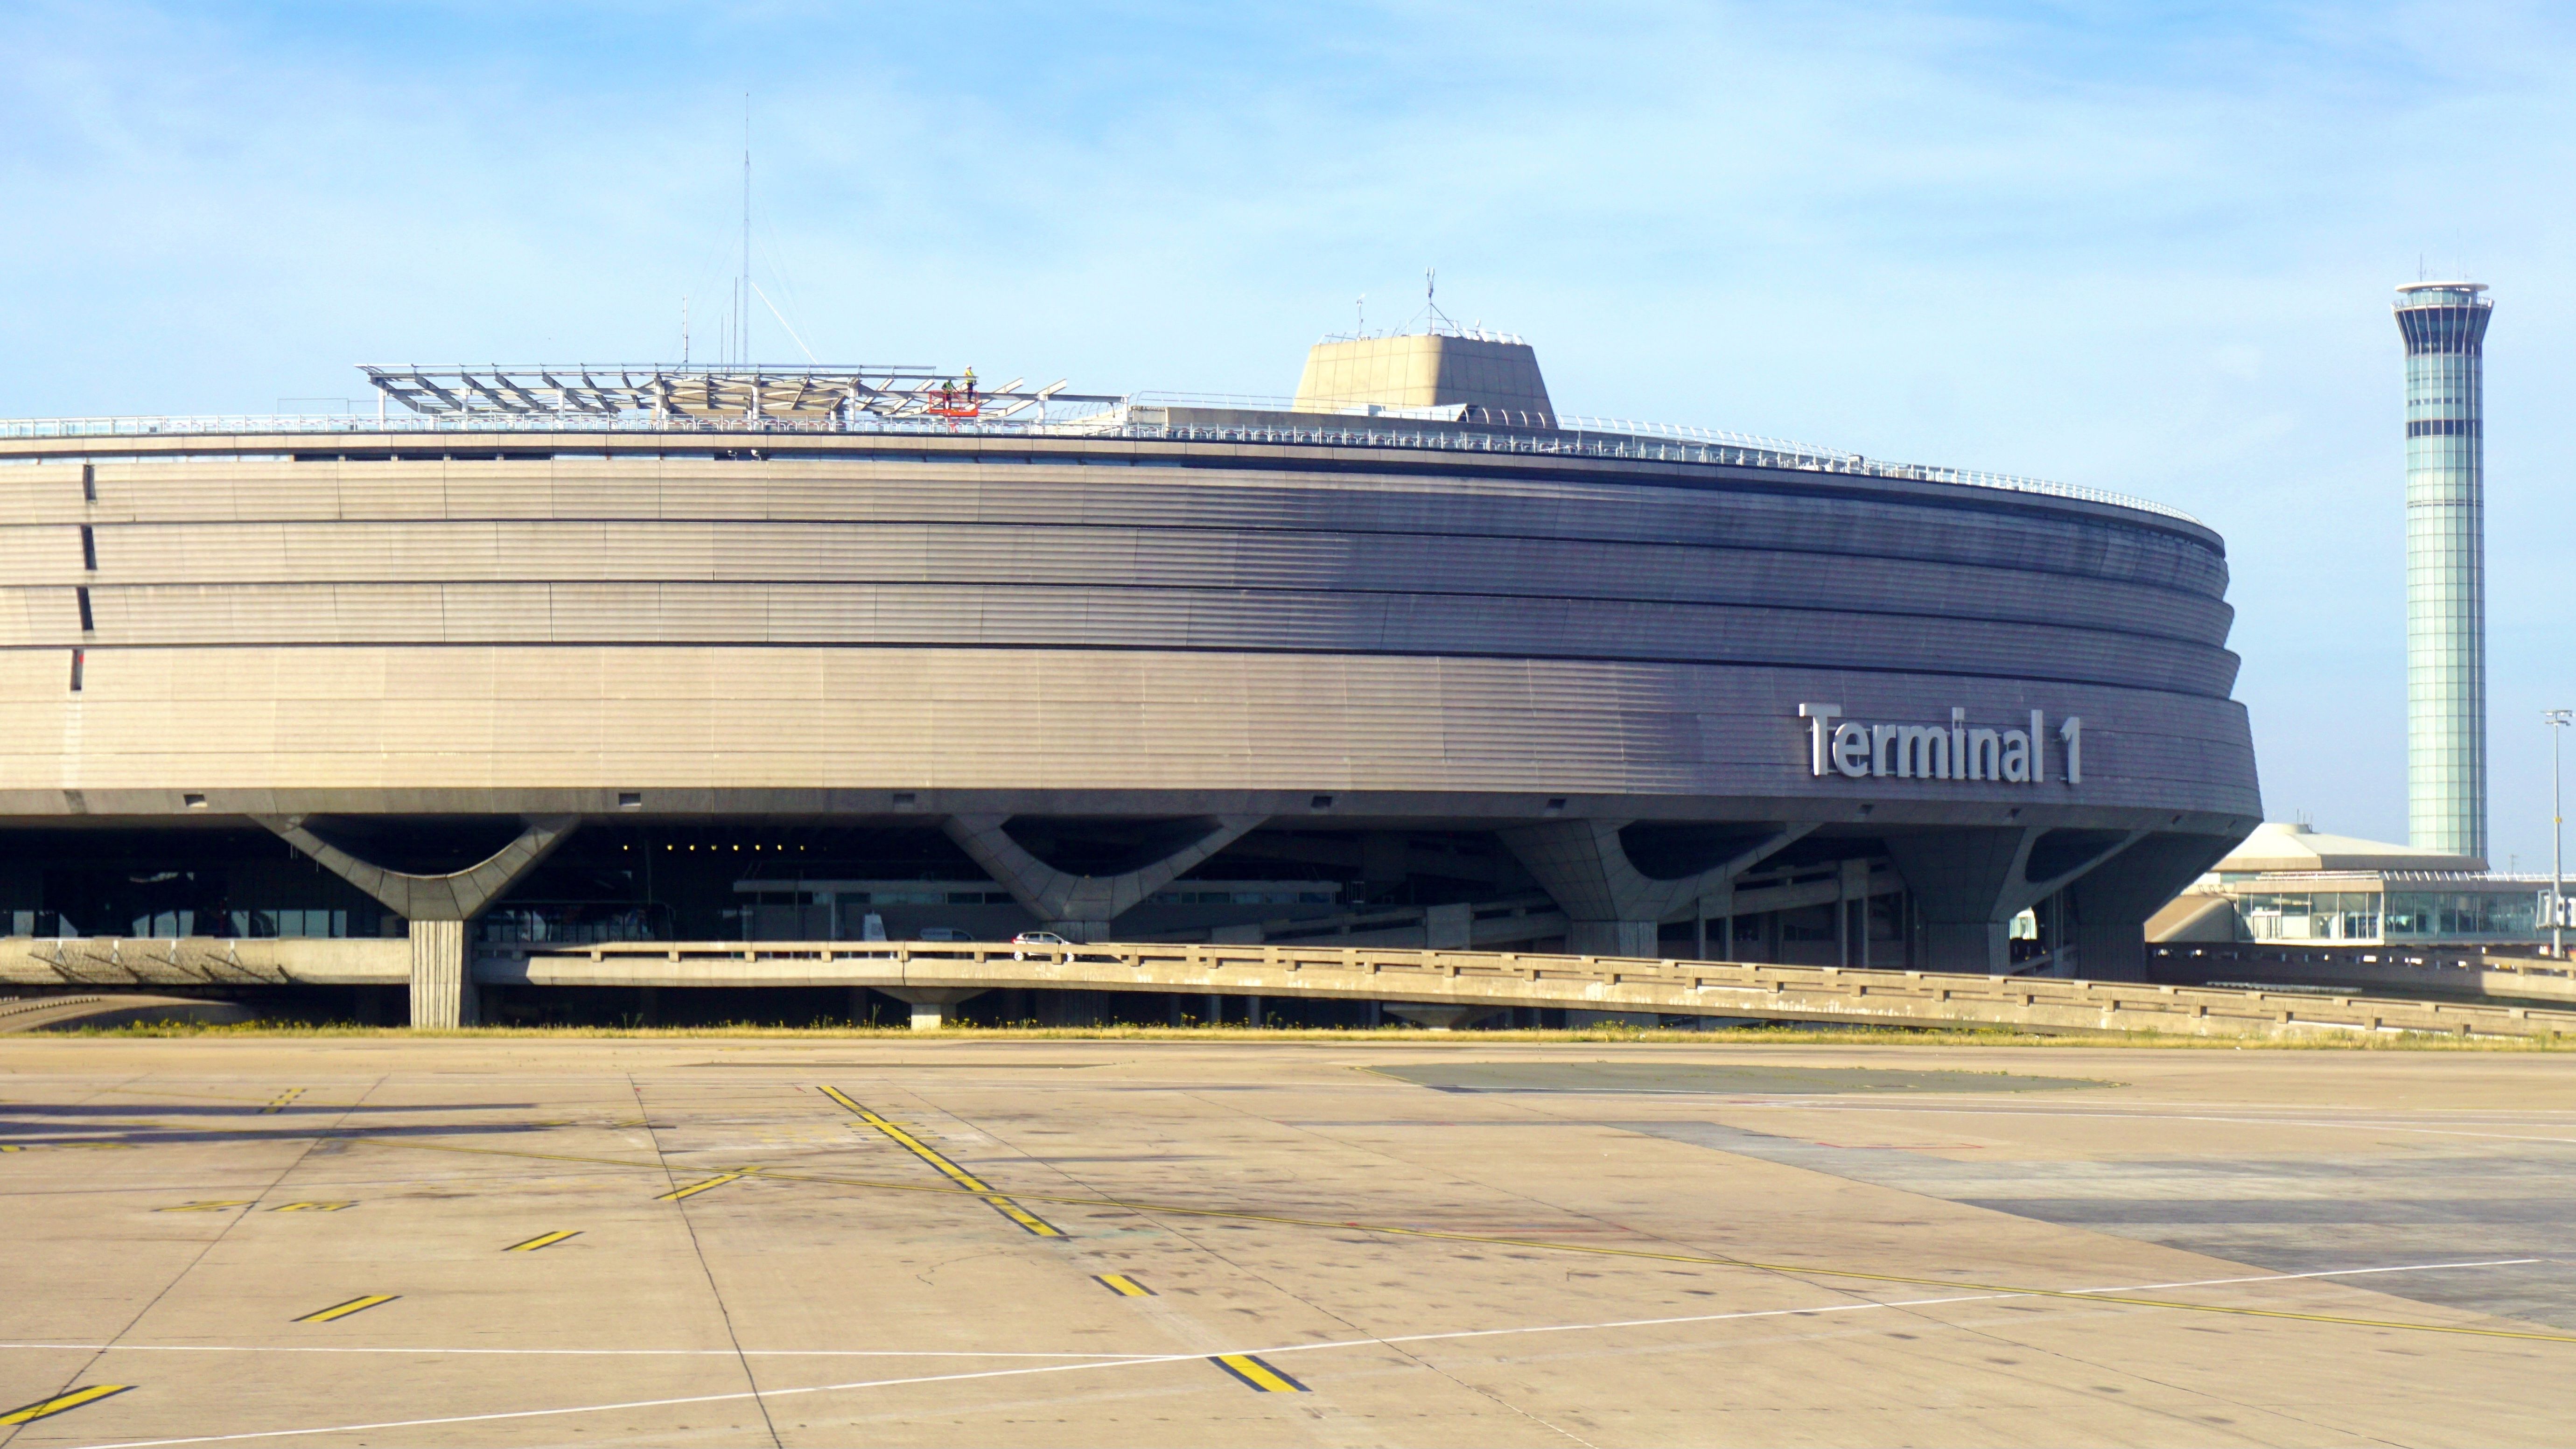 A photo of the Terminal 1 building at Paris Charles De Gaulle Airport.